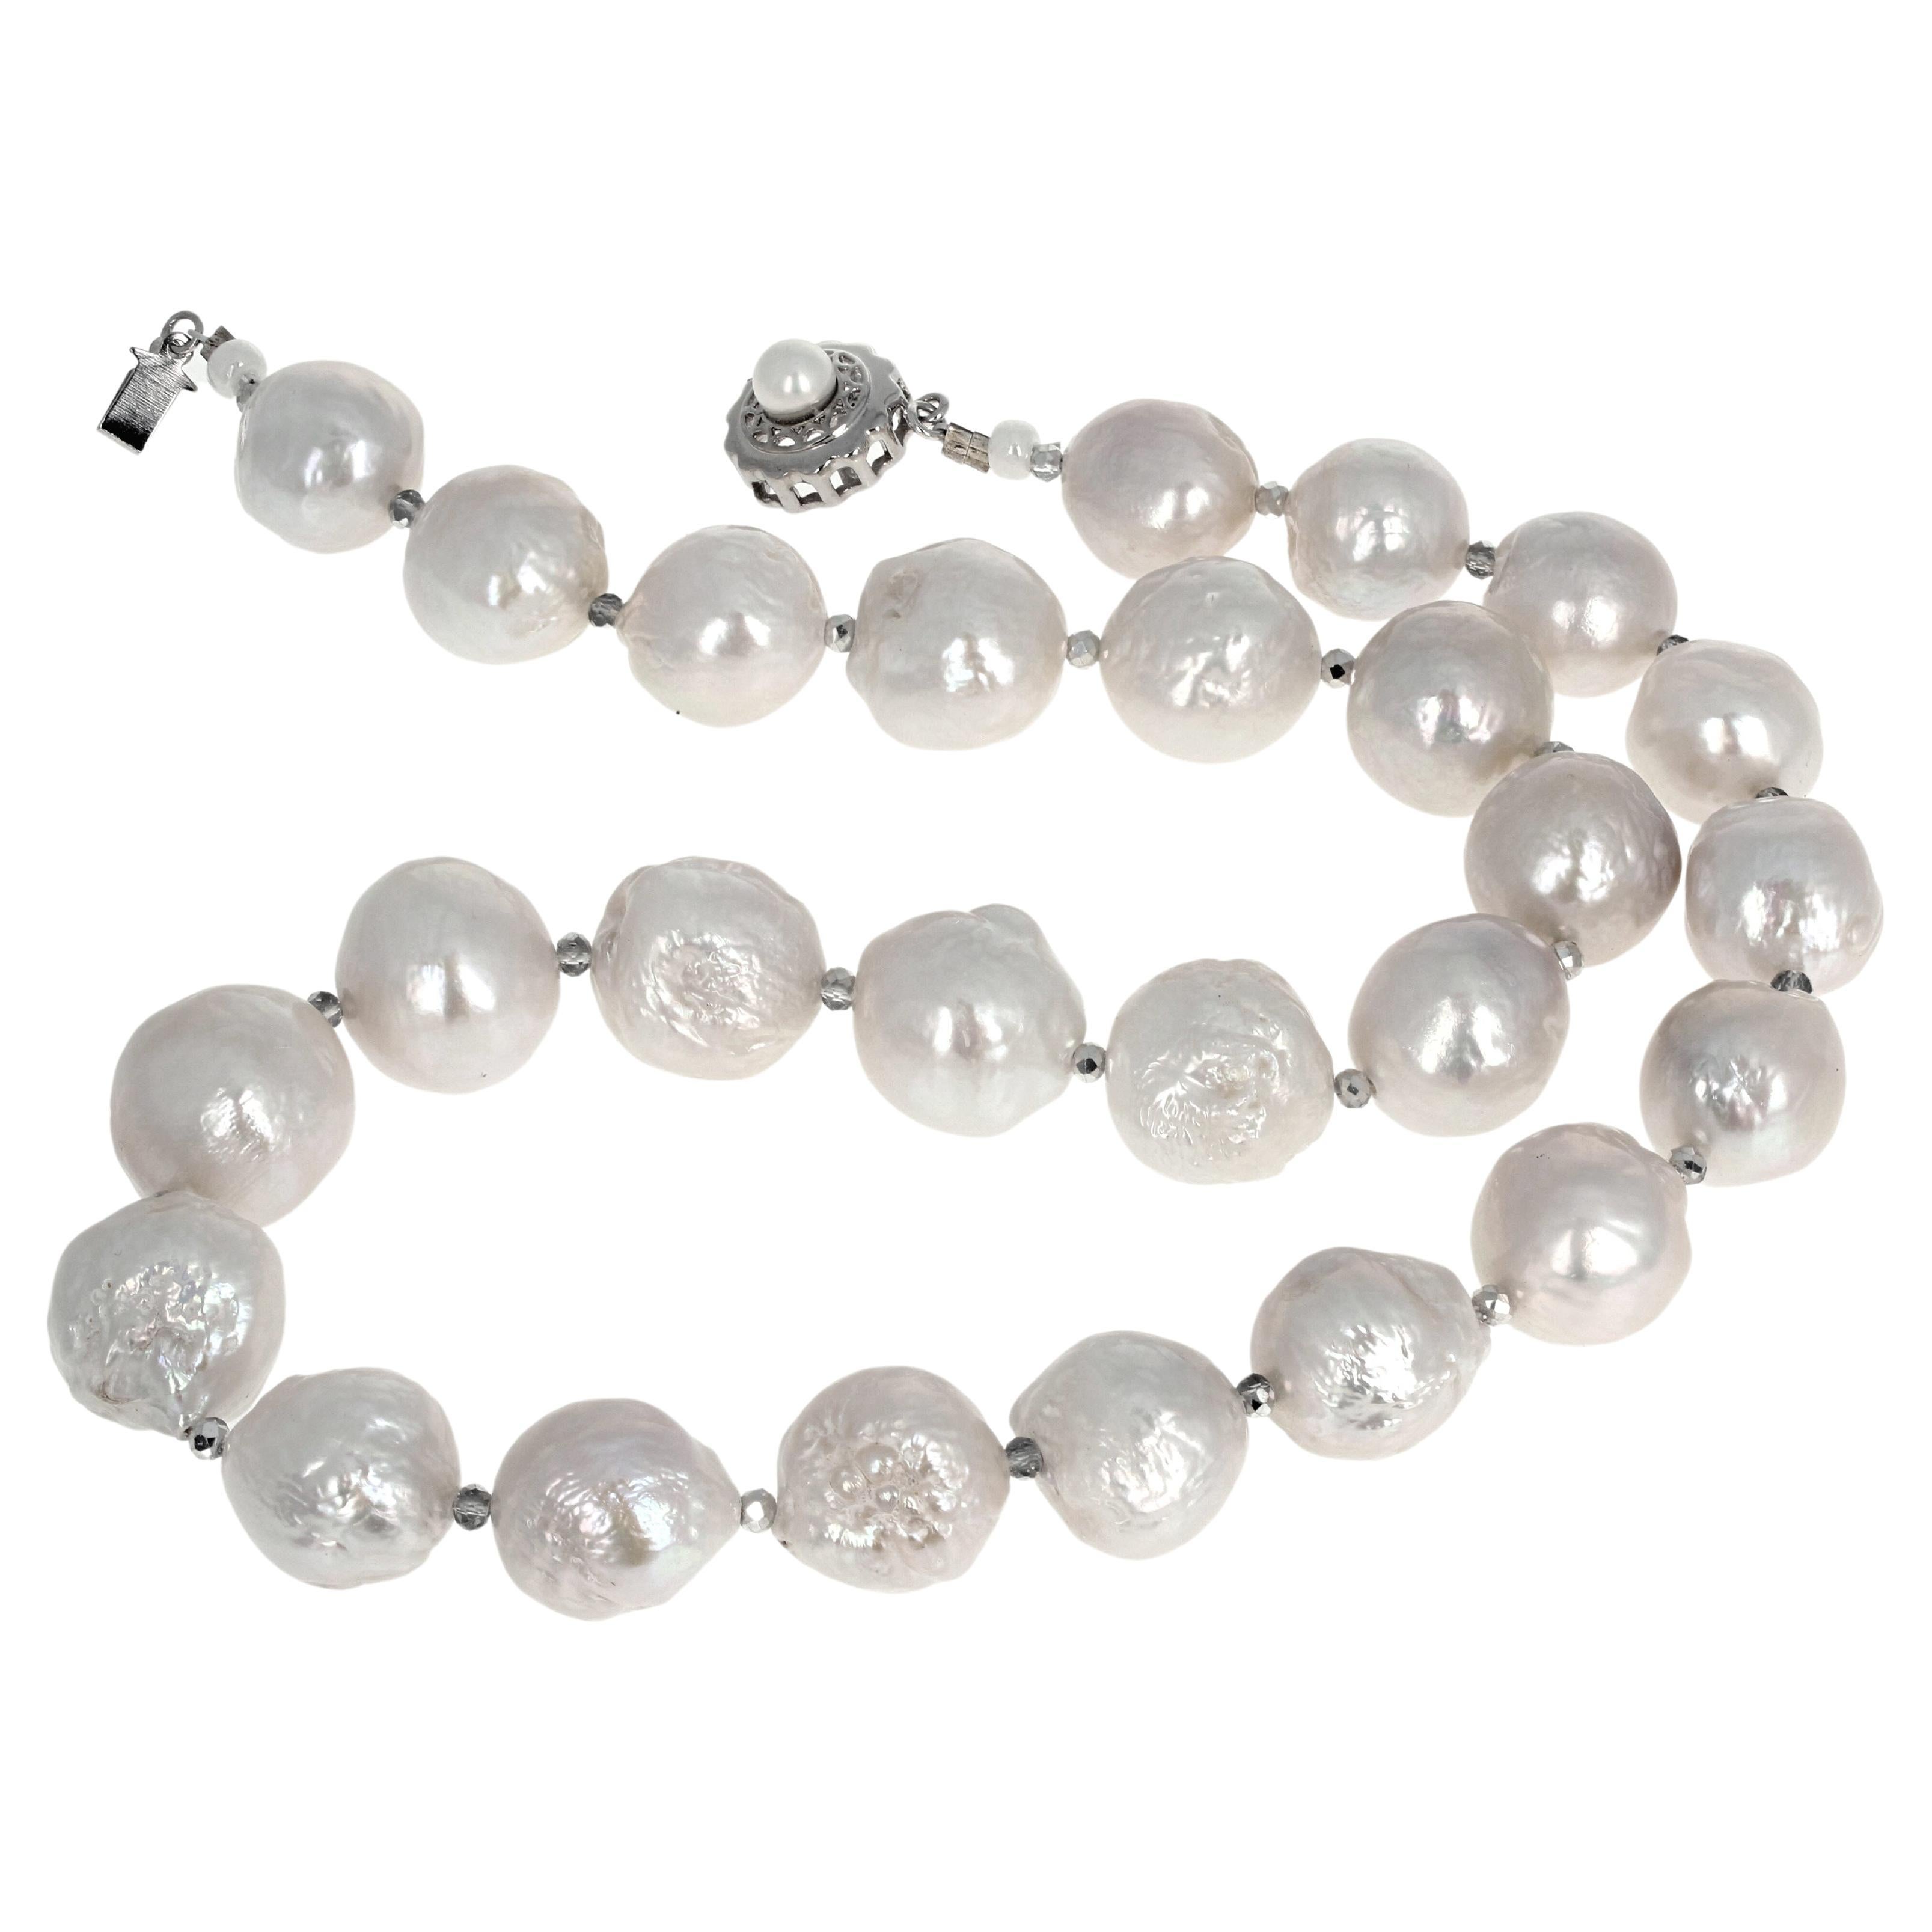 These are truly magnificent approximately 17mm real cultured White Pearls set in this 19 12 inch long necklace.  (They are not grey - they are white white white). The clasp is an easy to use slide-in clasp.  If you want a simple hook clasp we sill